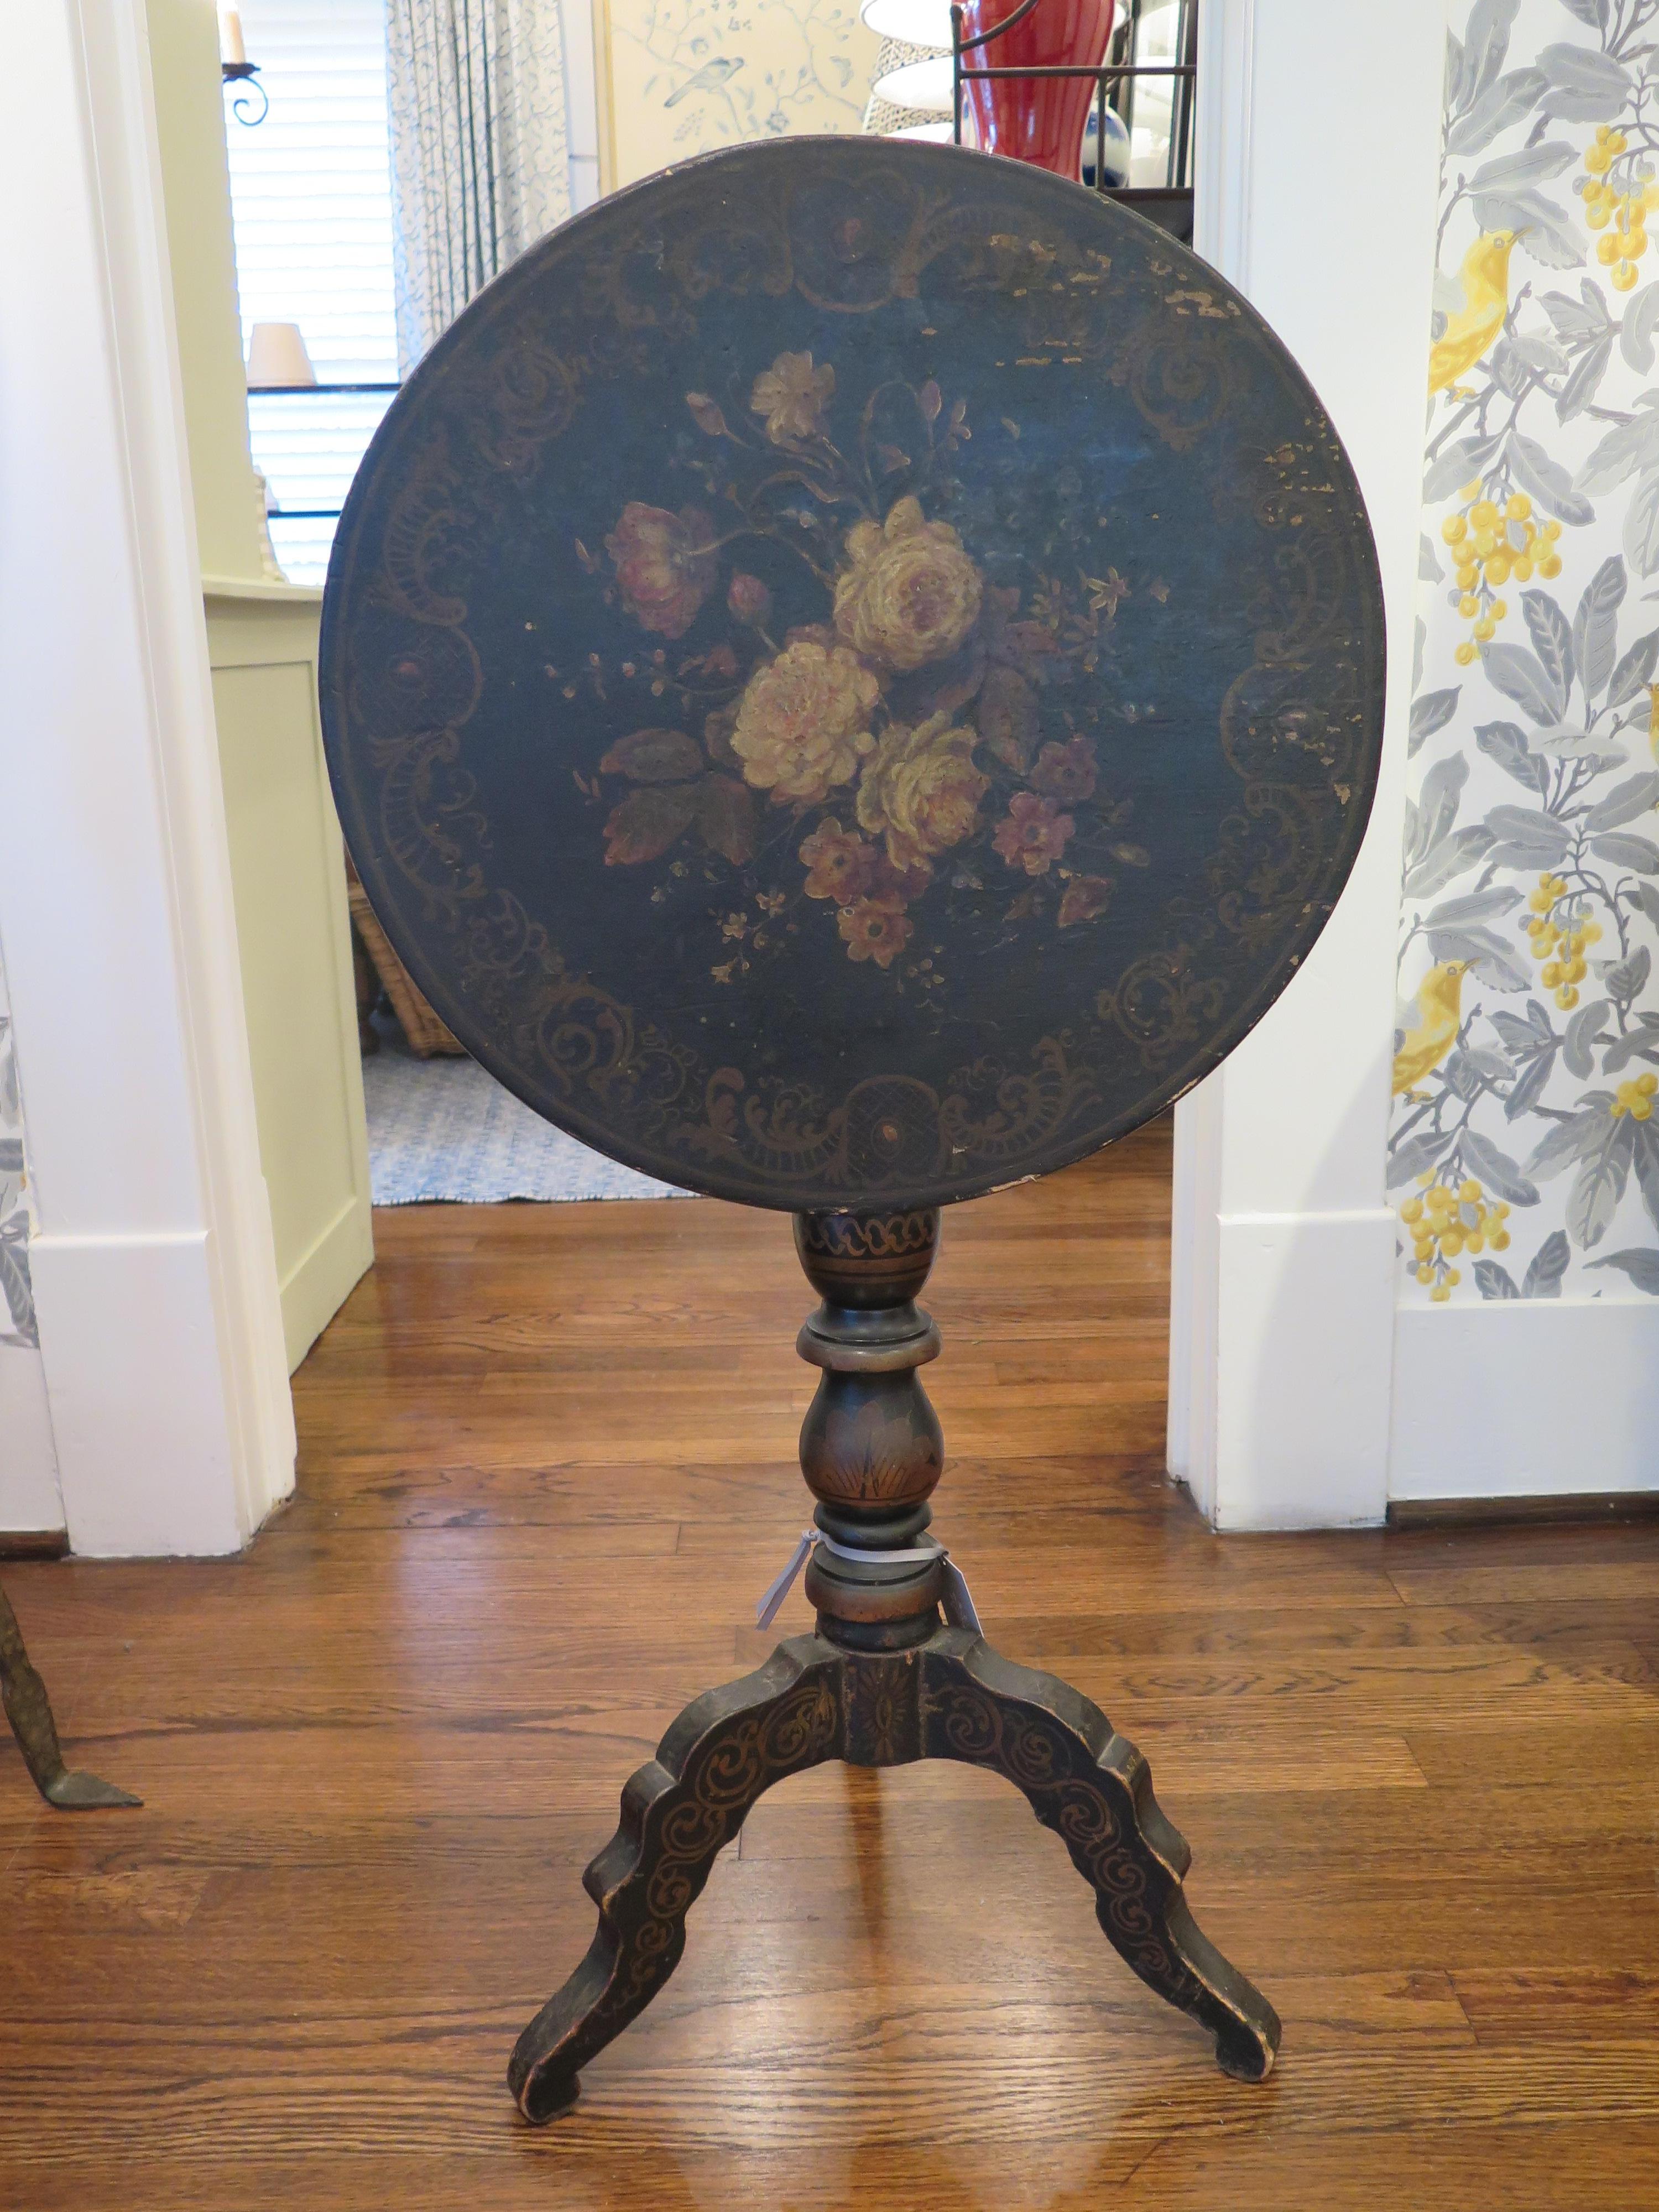 19th century tole tilt-top parlor table with beautiful painted florals and border detail.